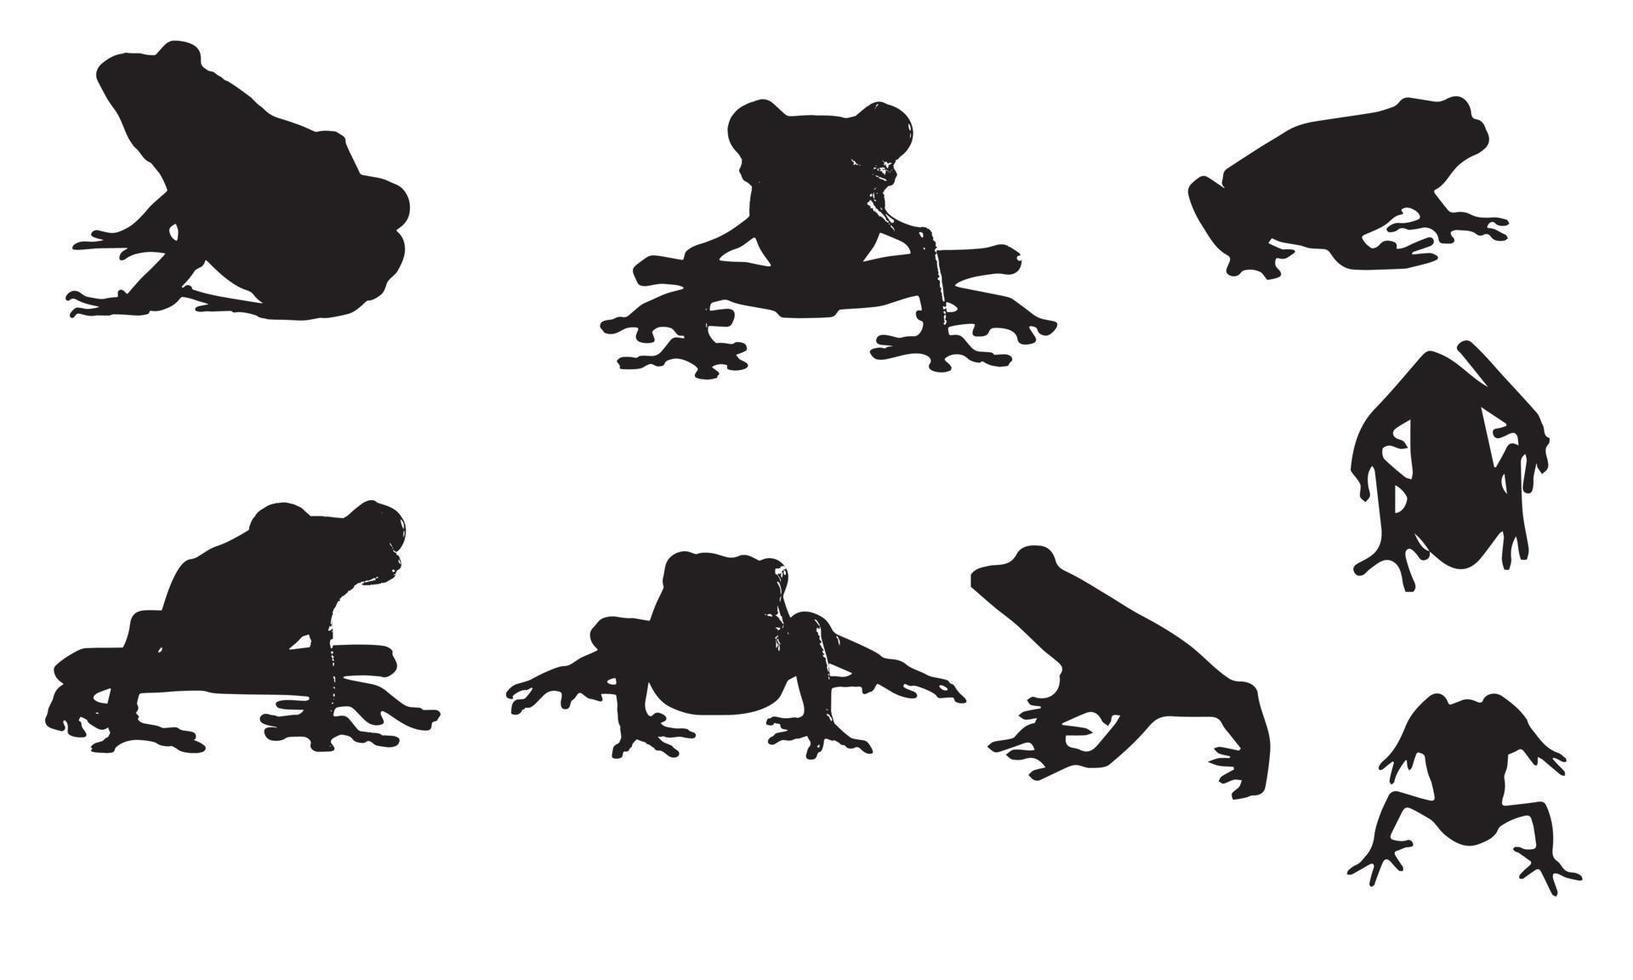 frog vector illustration design black and white collection